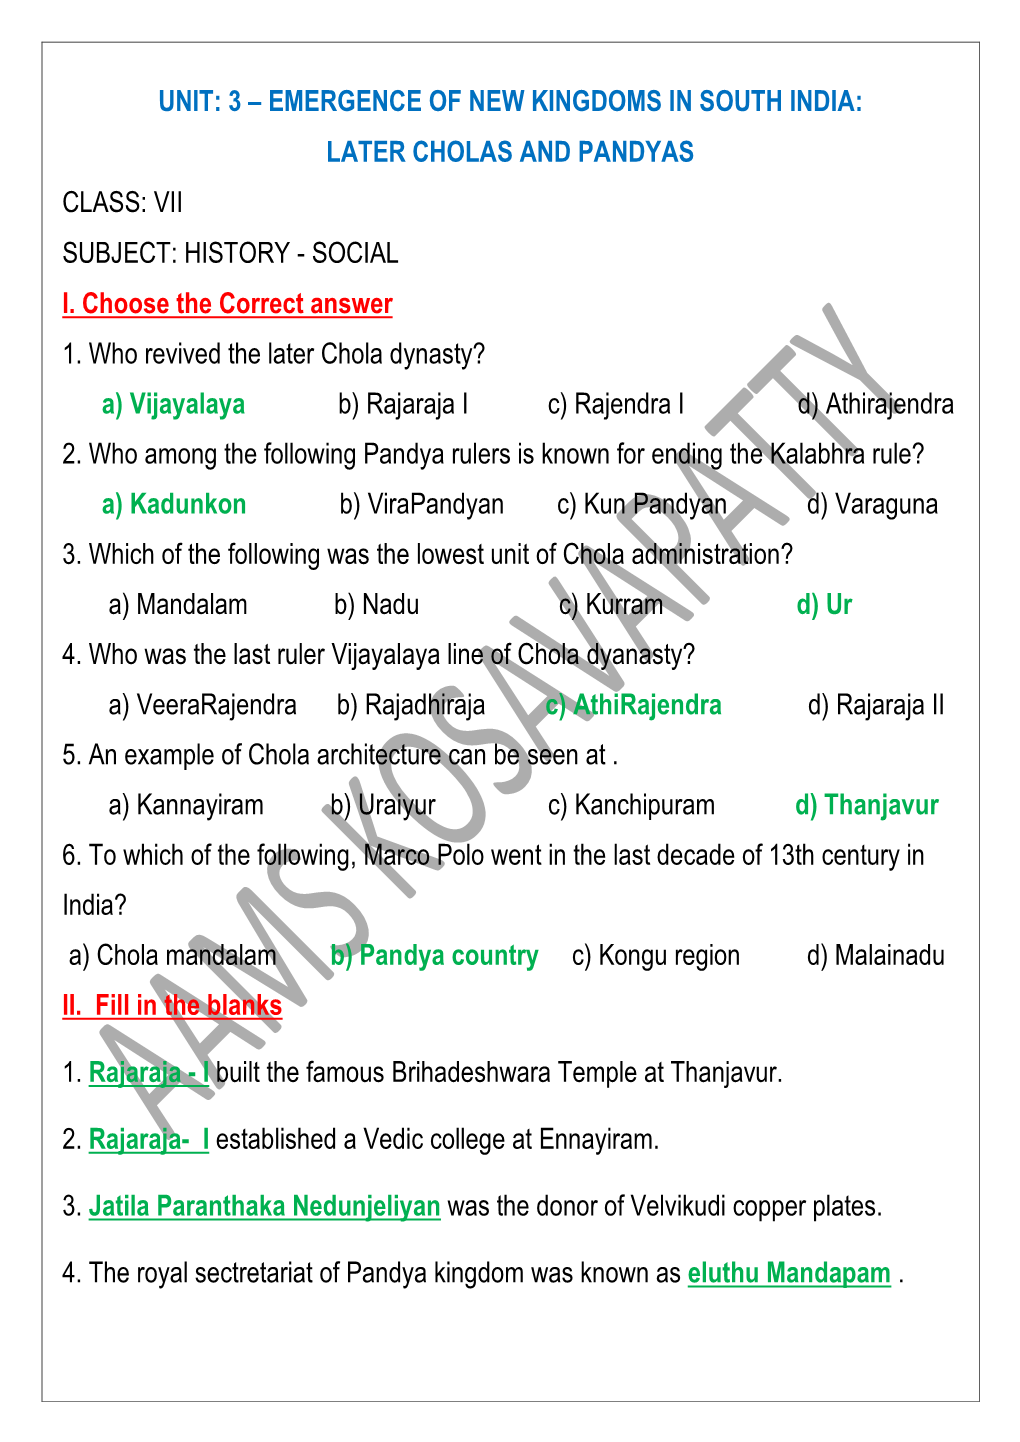 Unit: 3 – Emergence of New Kingdoms in South India: Later Cholas and Pandyas Class: Vii Subject: History - Social I